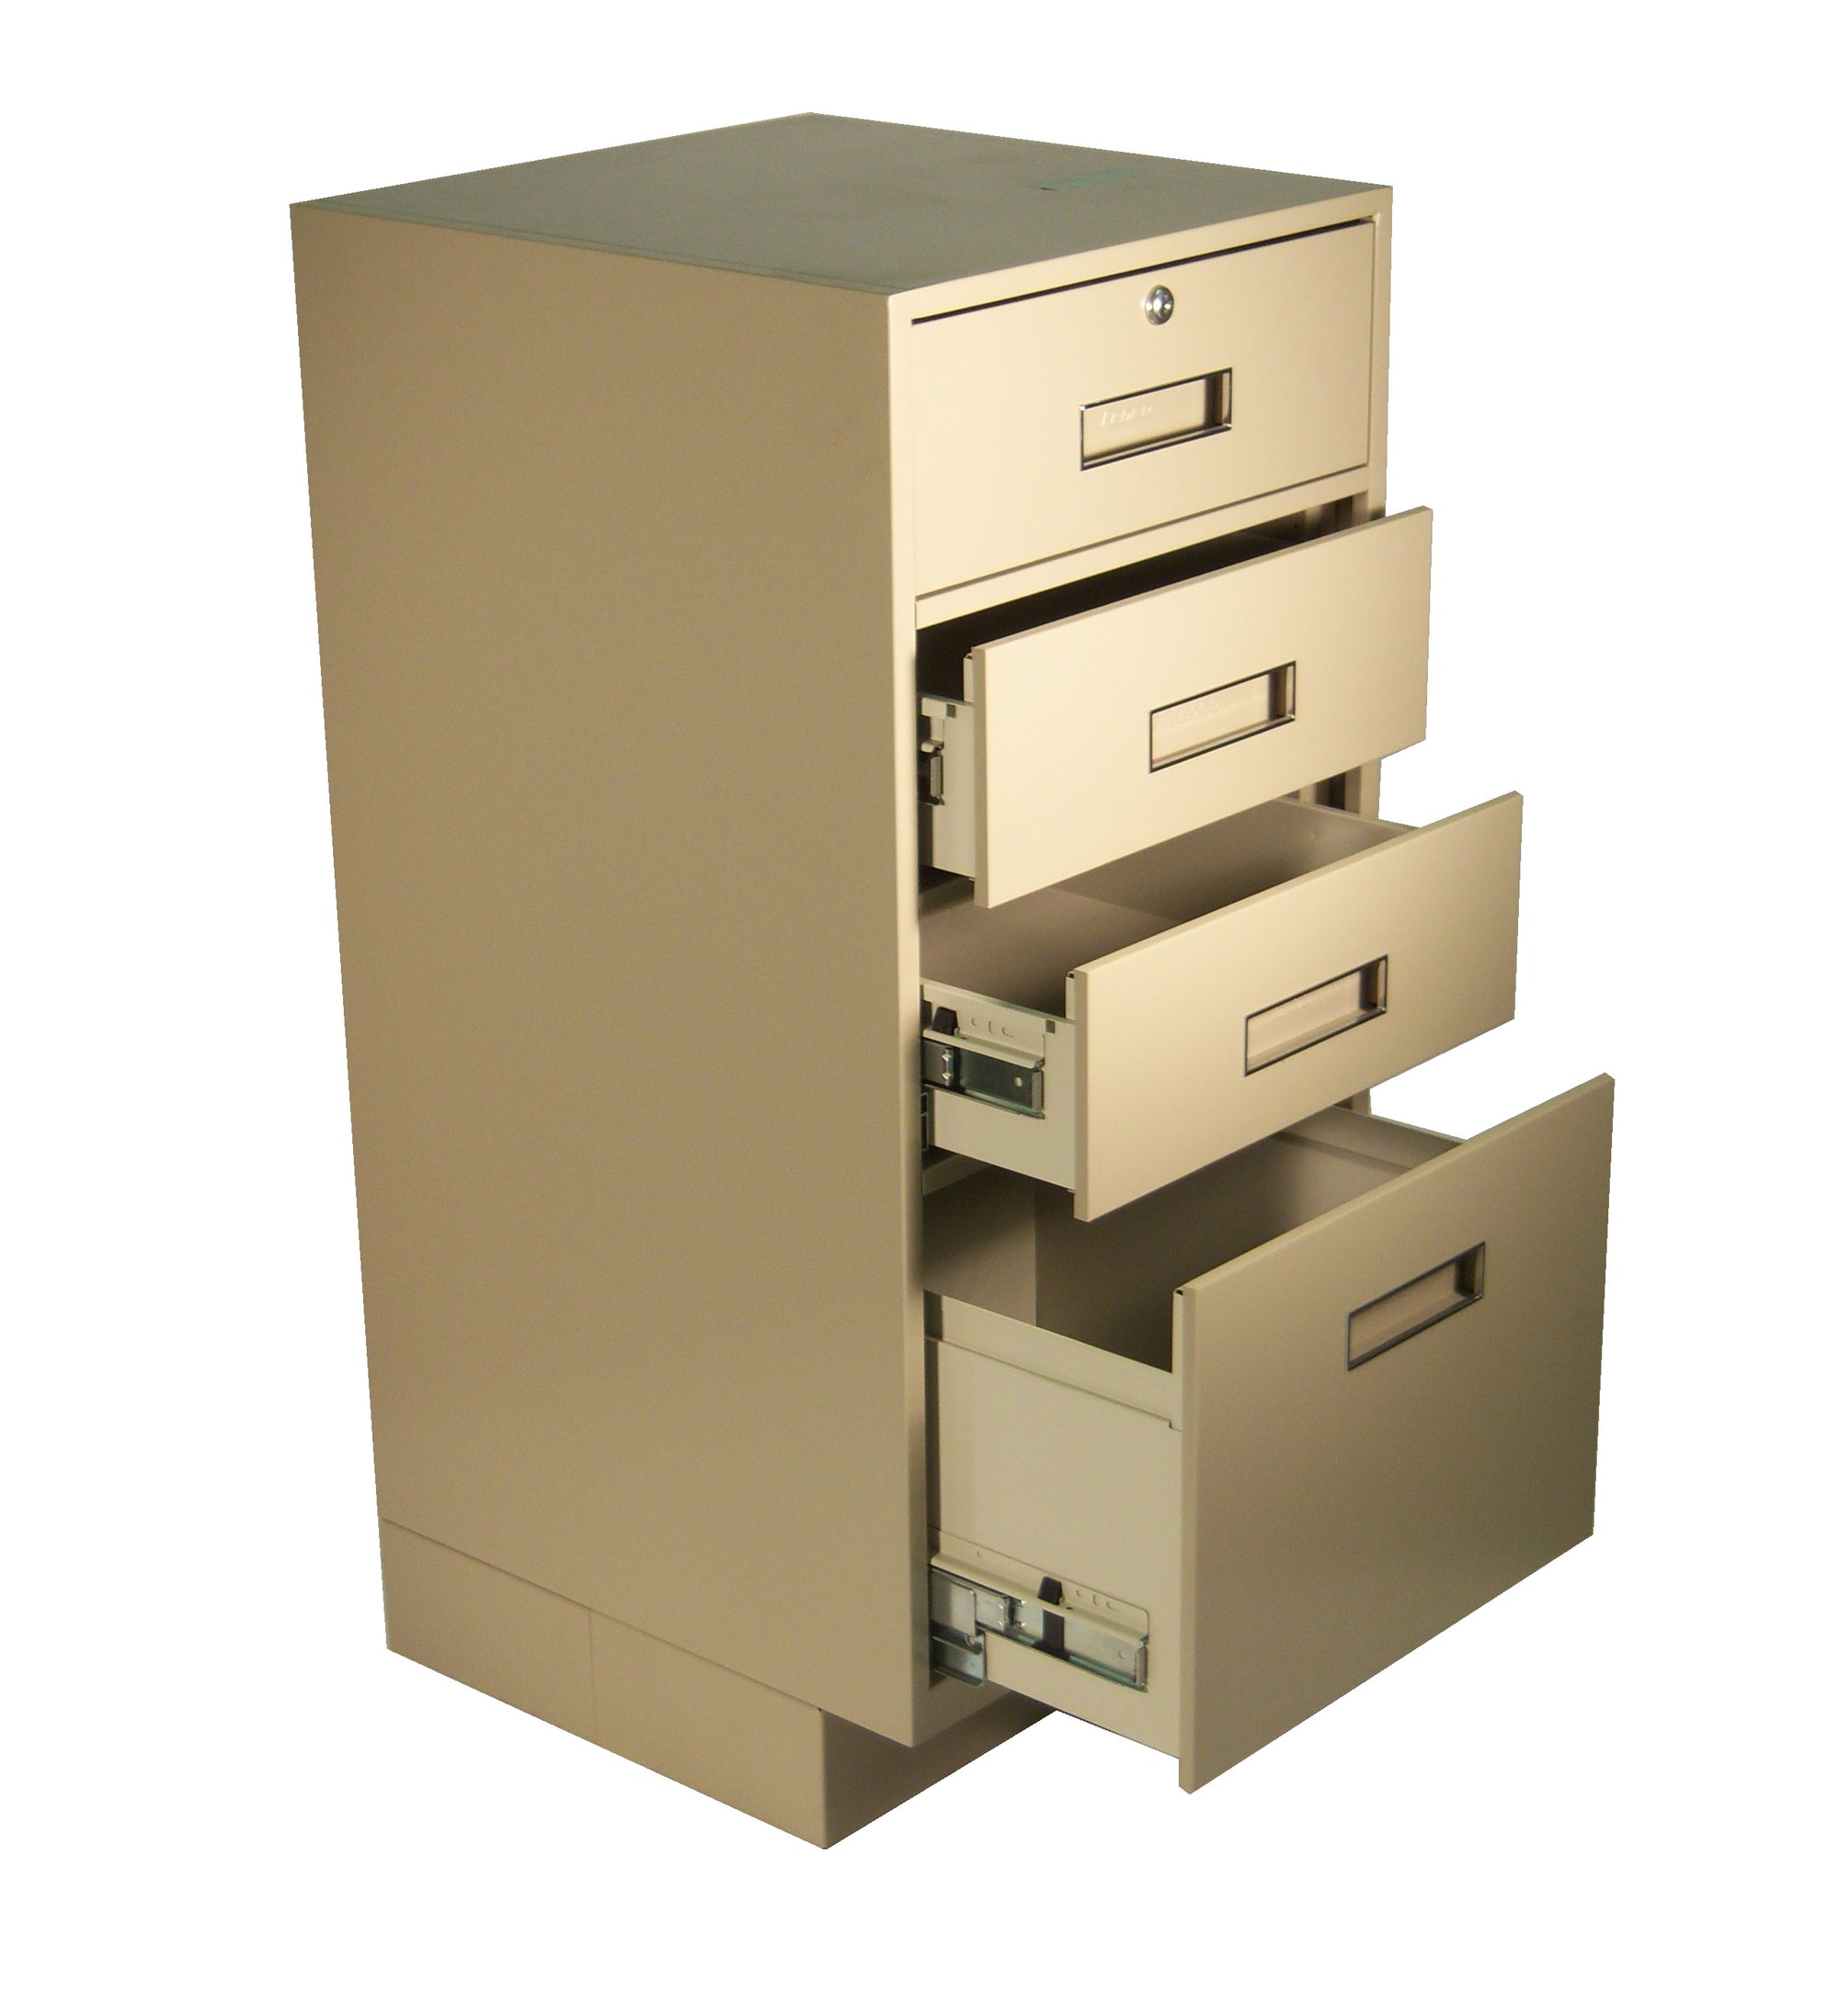 Fenco F-212 Pedestal Unit with 3 Box Drawers and 1 Legal Drawer